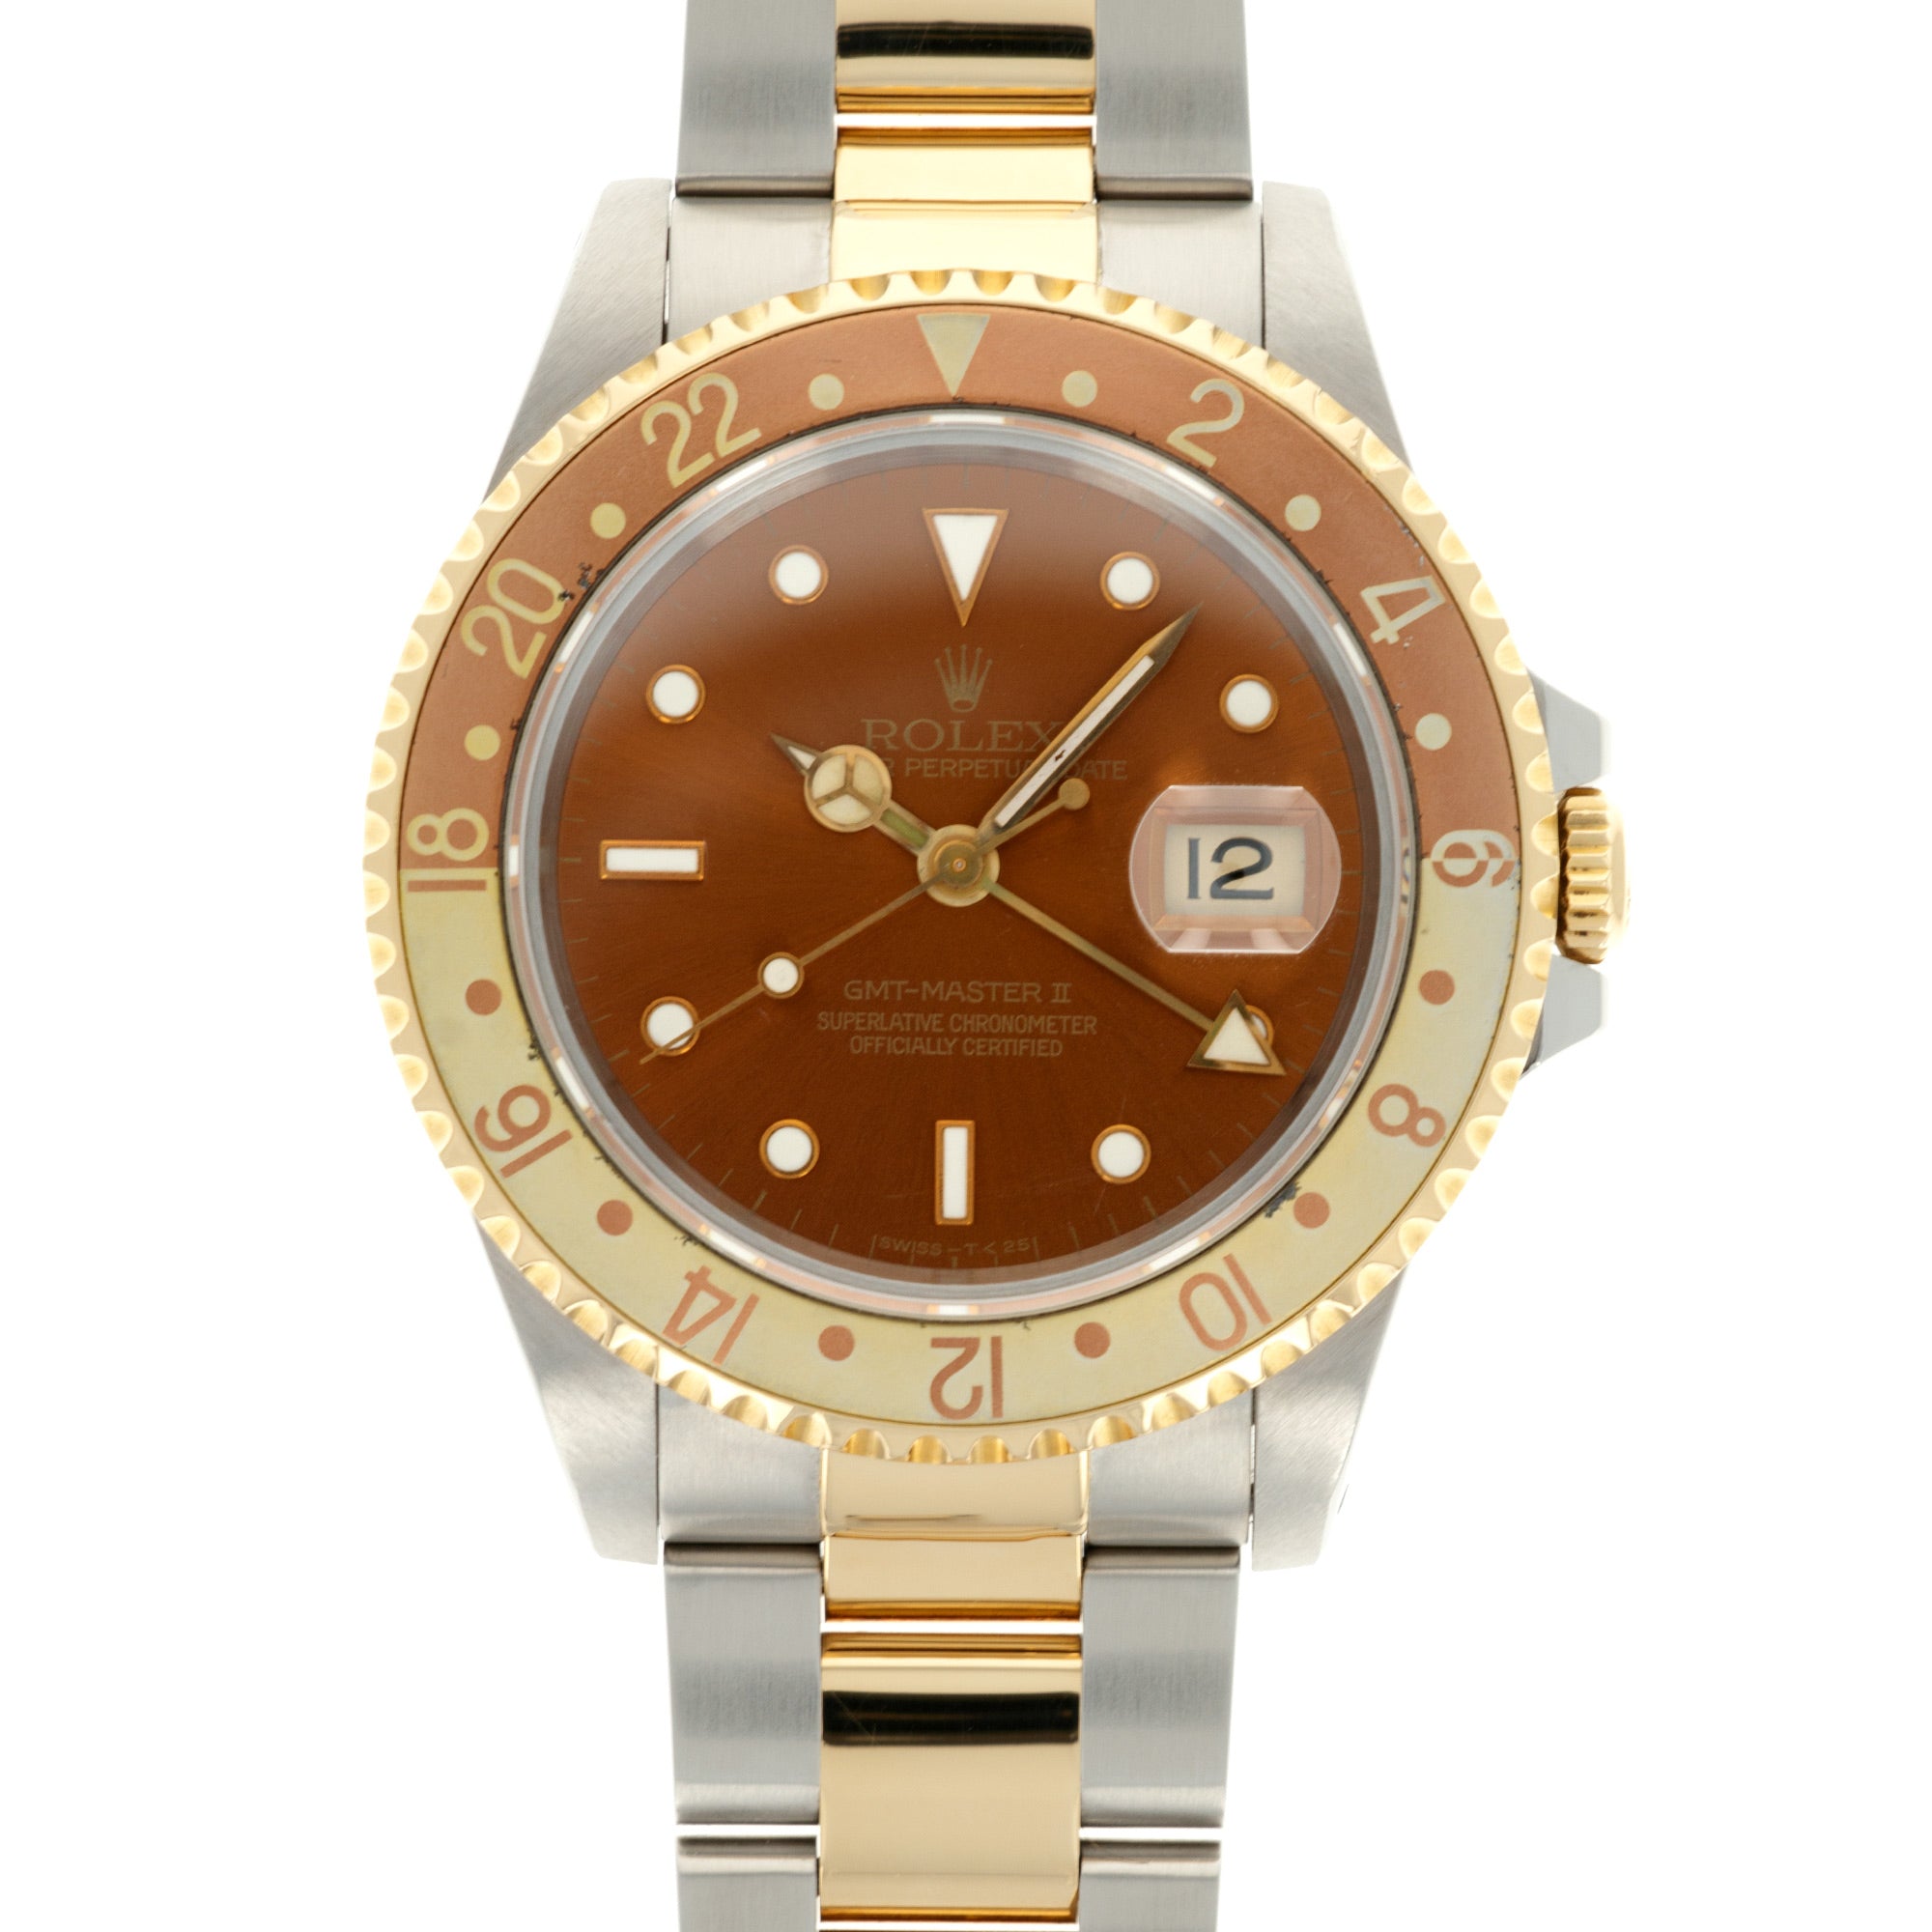 Rolex - Rolex Two-Tone Root Beer GMT-Master Ref. 16713 - The Keystone Watches